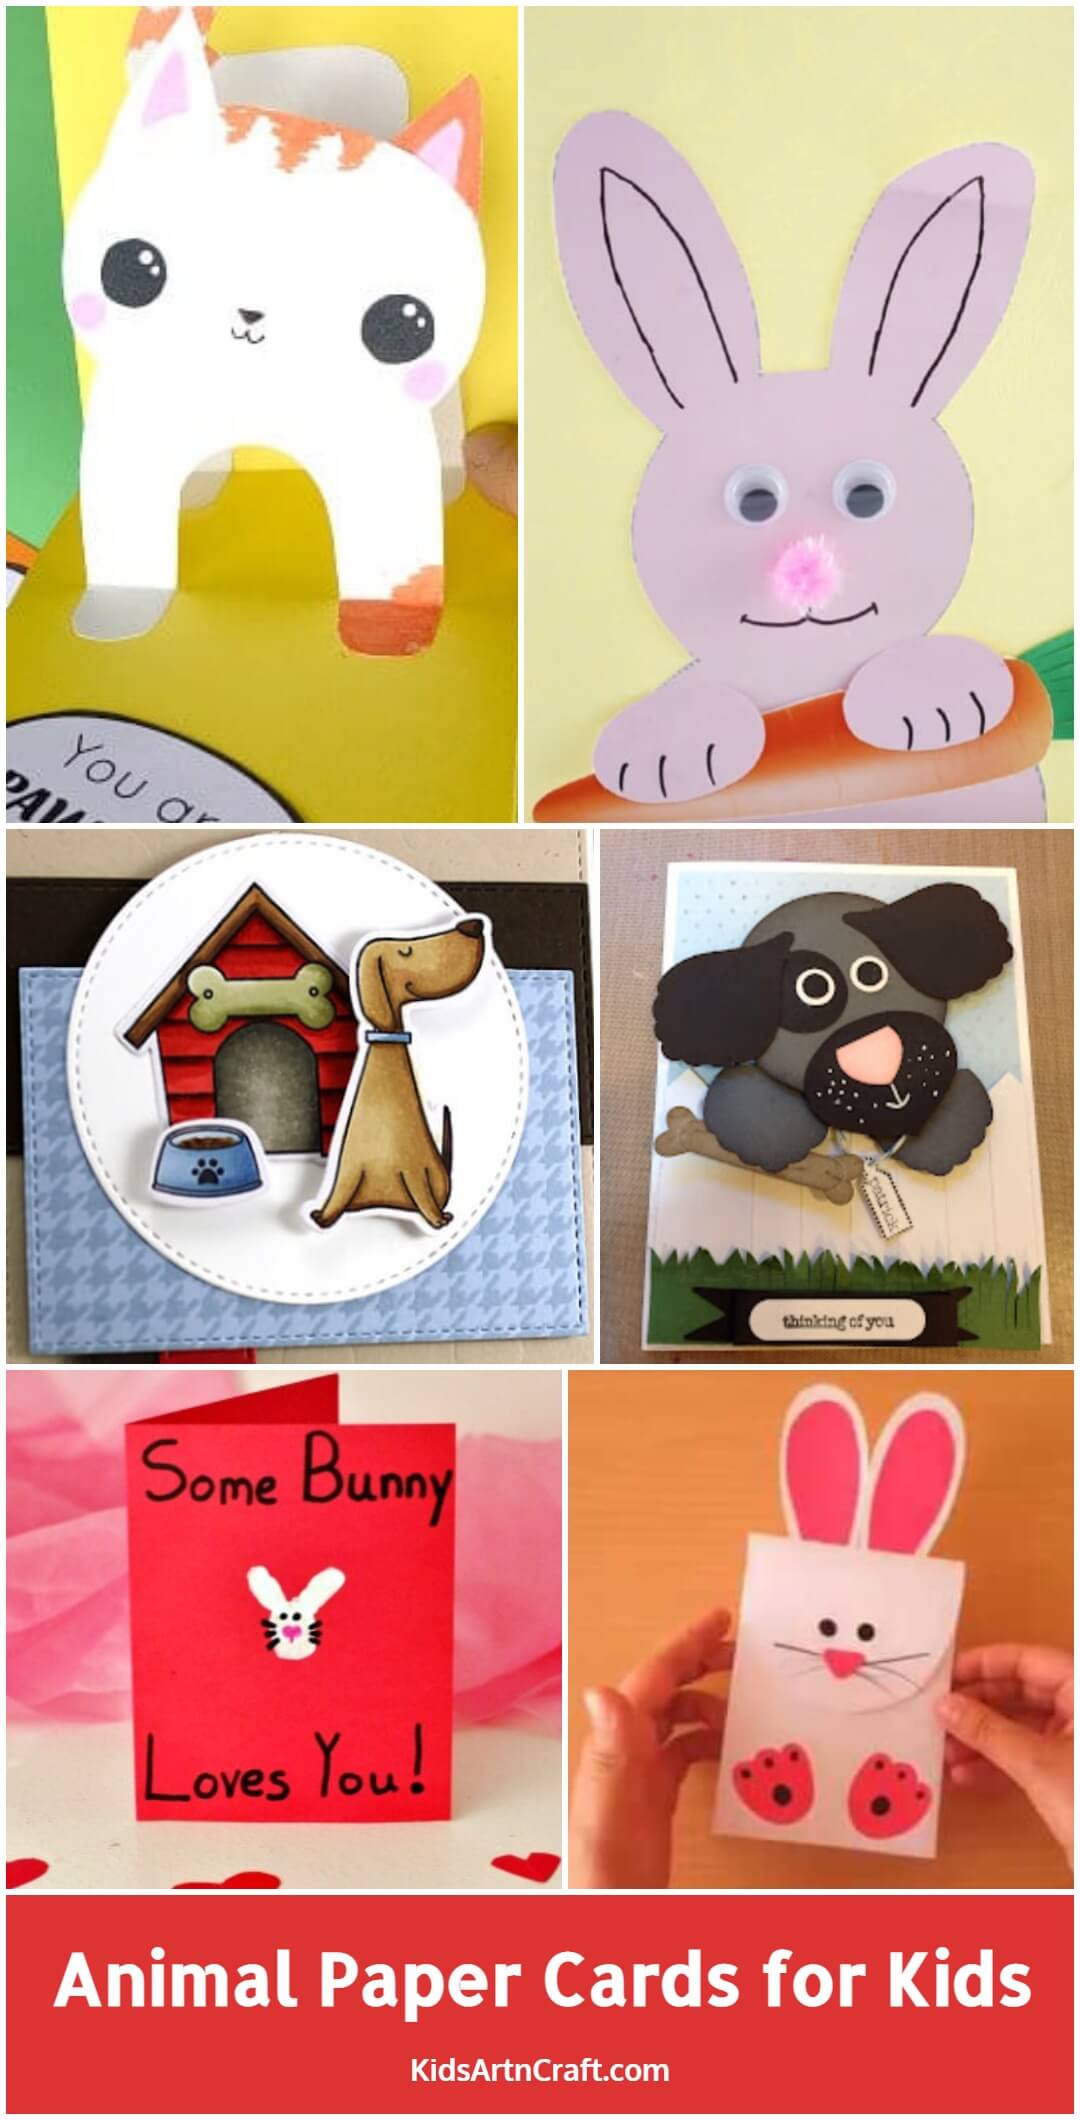 Animal Paper Cards for Kids